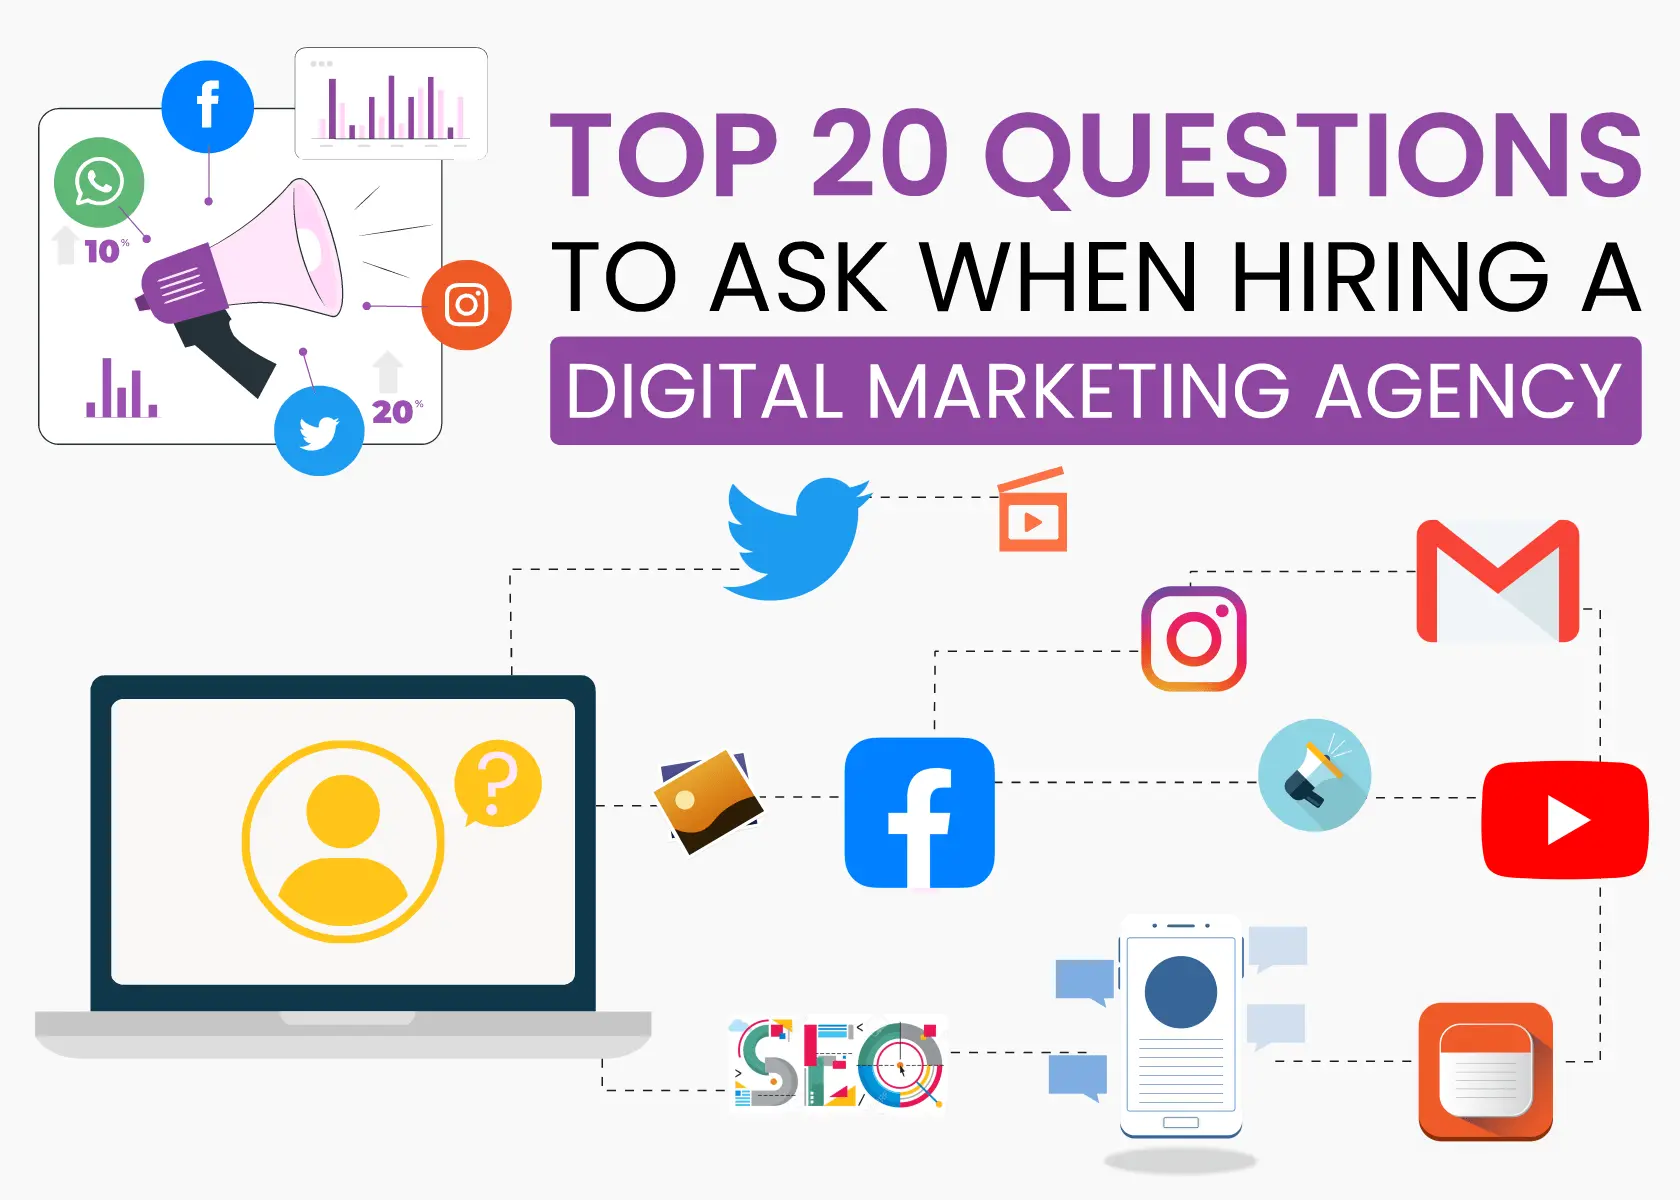 Questions To Ask When Hiring a Digital Marketing Agency